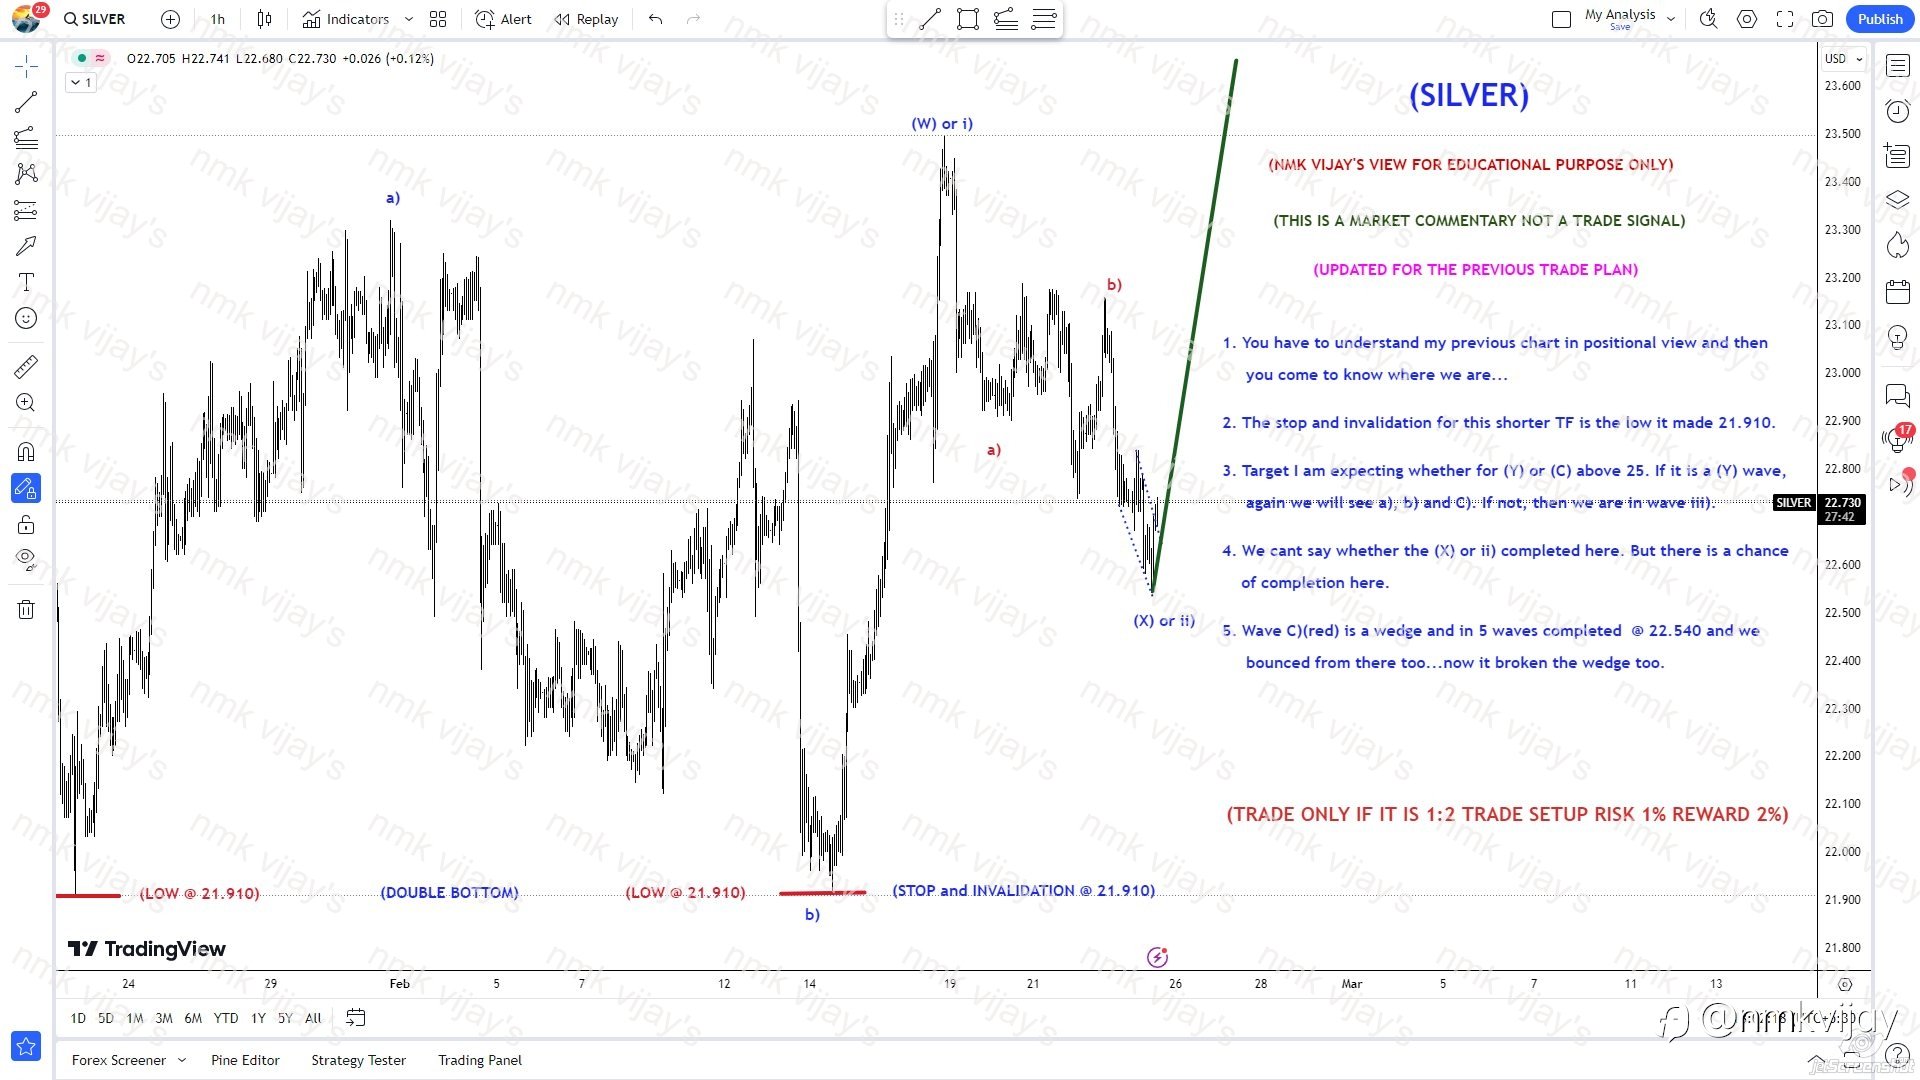 SILVER: Shorter TF view TP 25 and above?